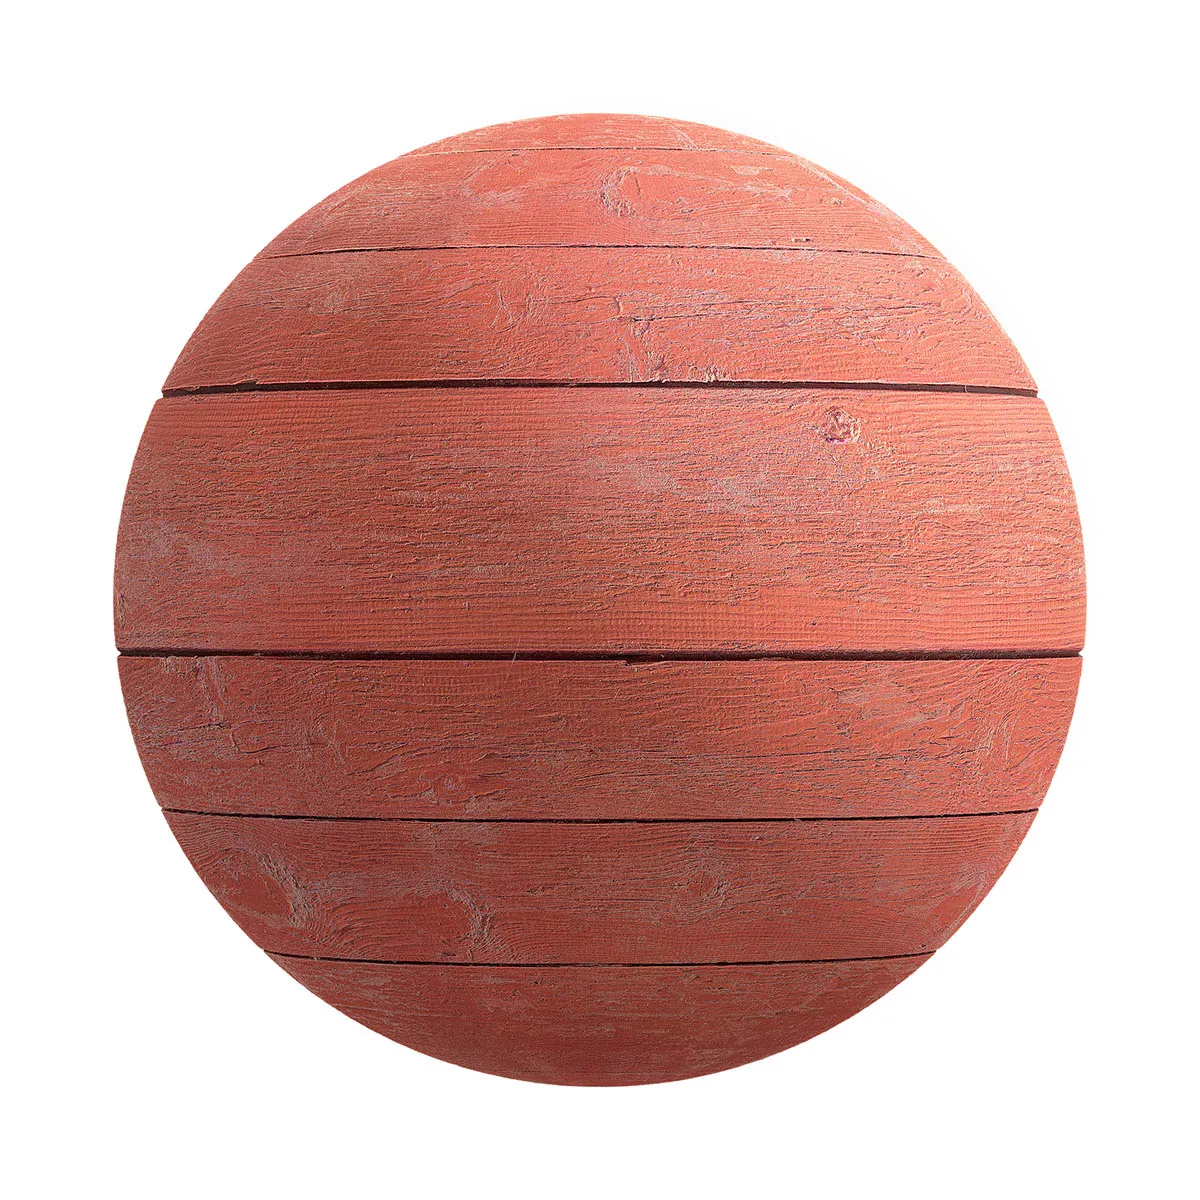 CGAxis PRB 18 – Red Painted Wooden Planks Pbr 60 – 4K – 8K